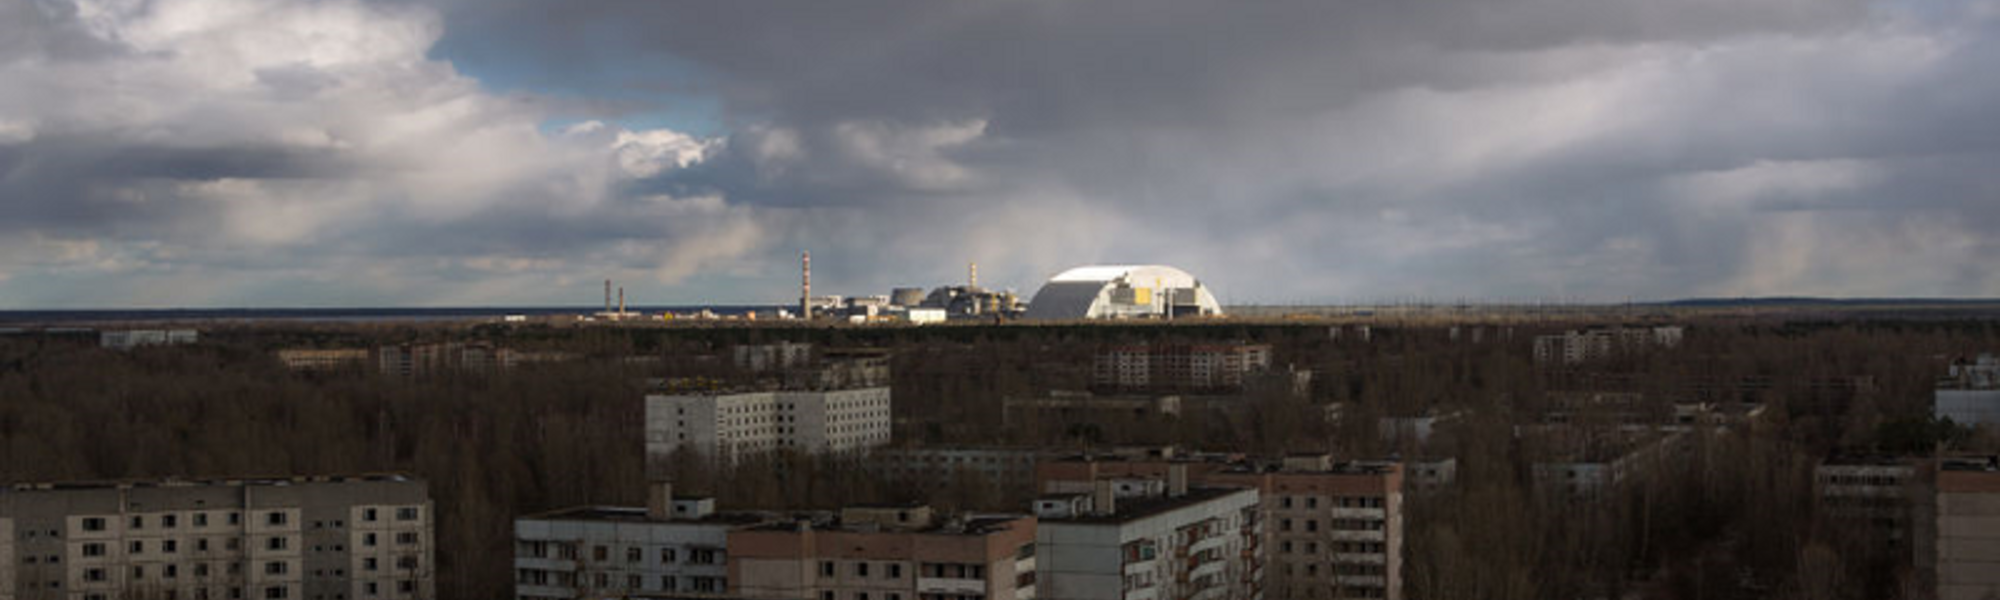 The Chernobyl nuclear power plant. View from Pripyat